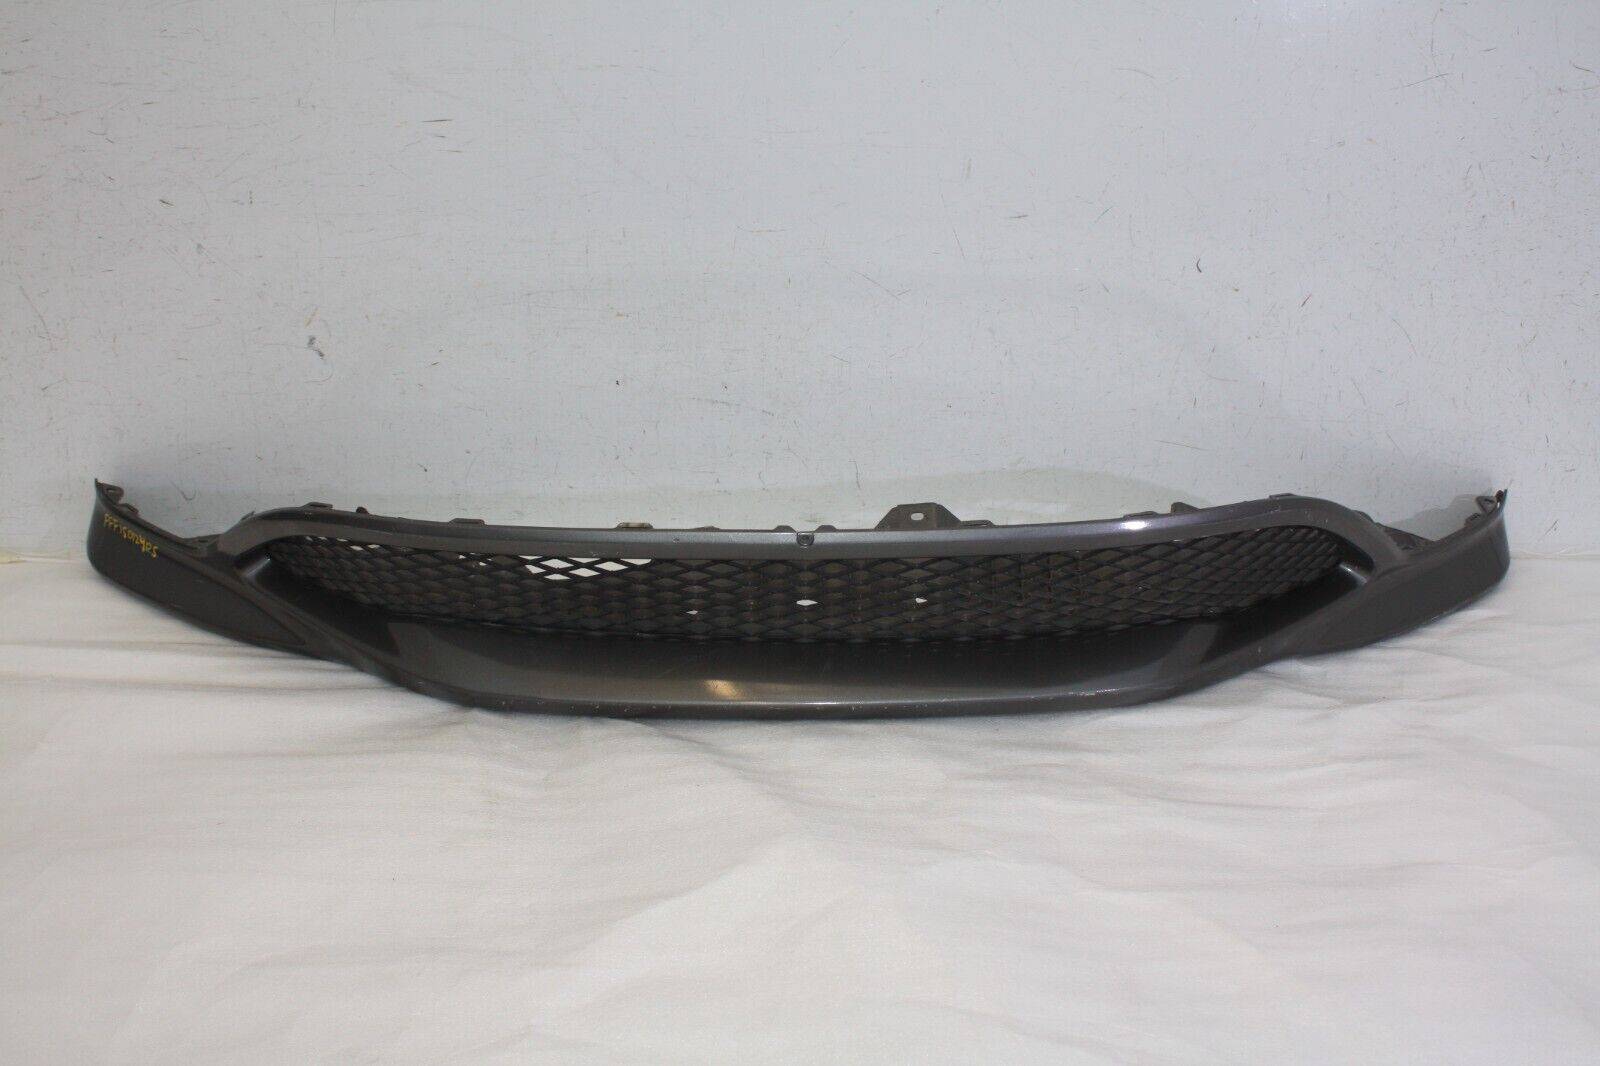 Honda Civic Front Bumper Lower Section 2006 TO 2012 71102 SMRZ ZZ00 Genuine 176183751704